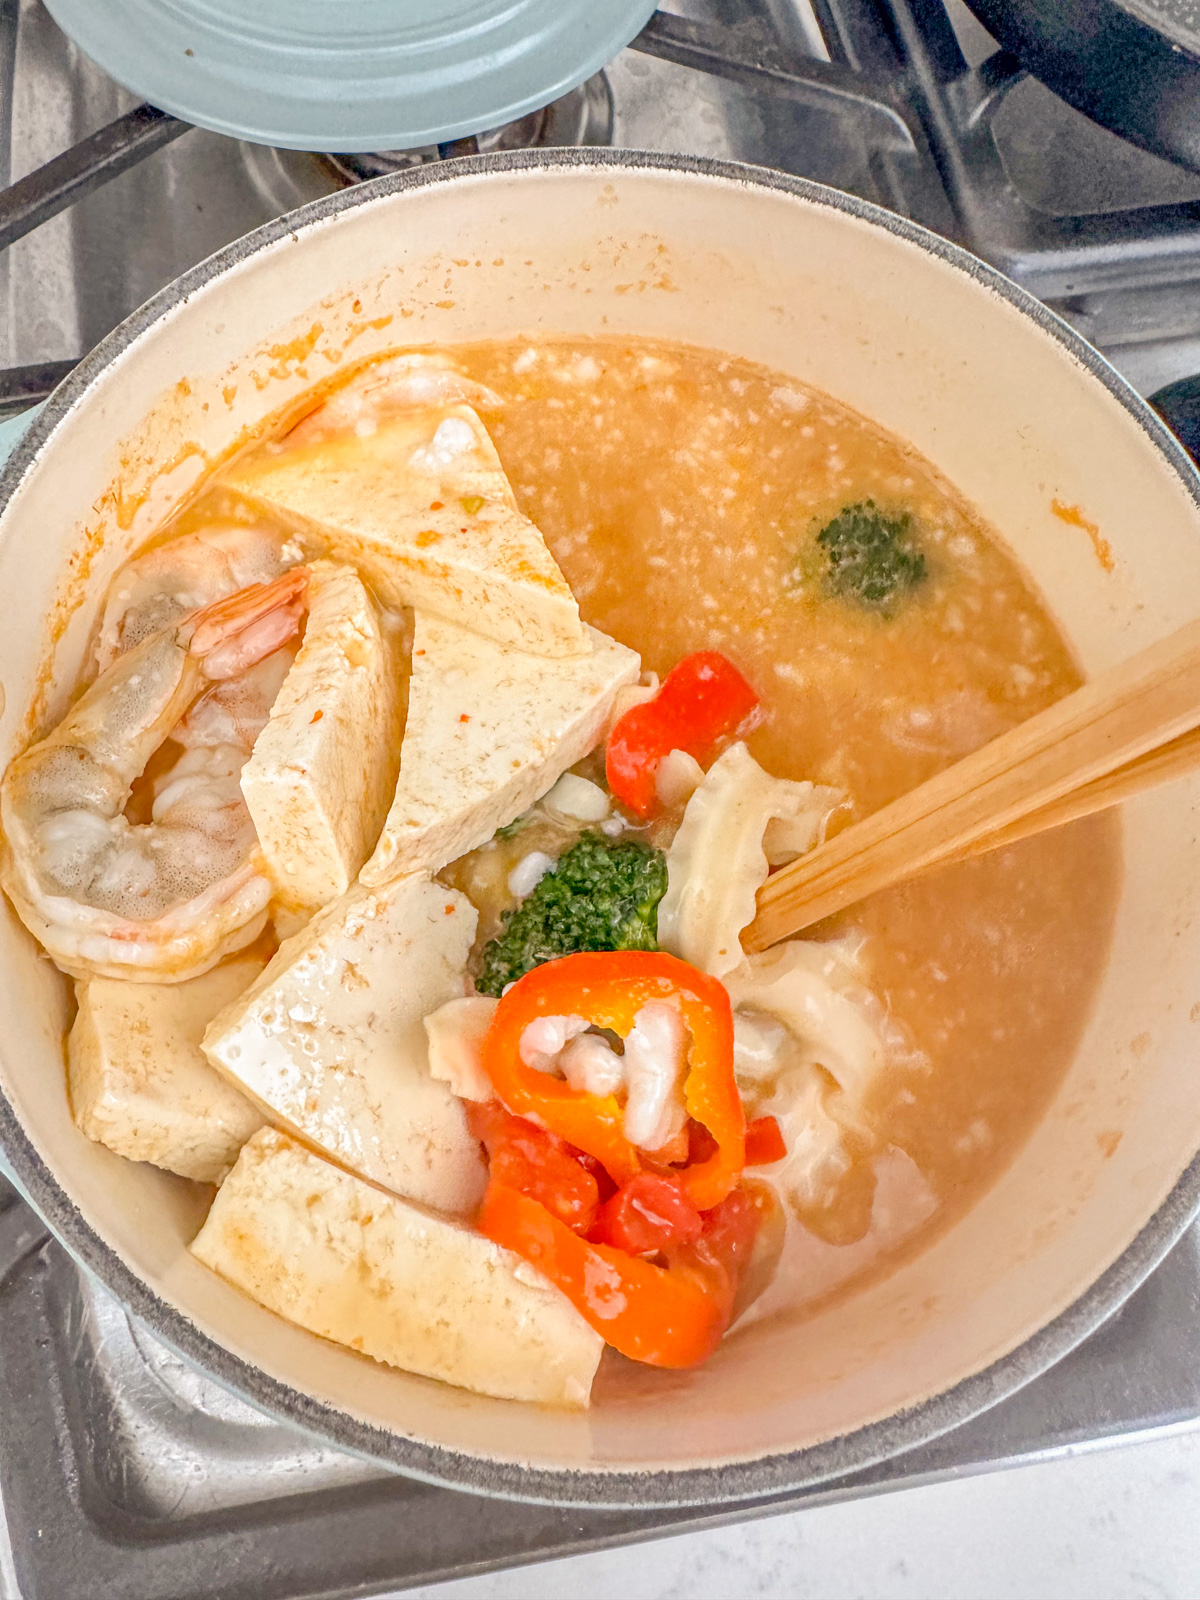 Stirring noodles with shrimp, tofu and bell peppers.